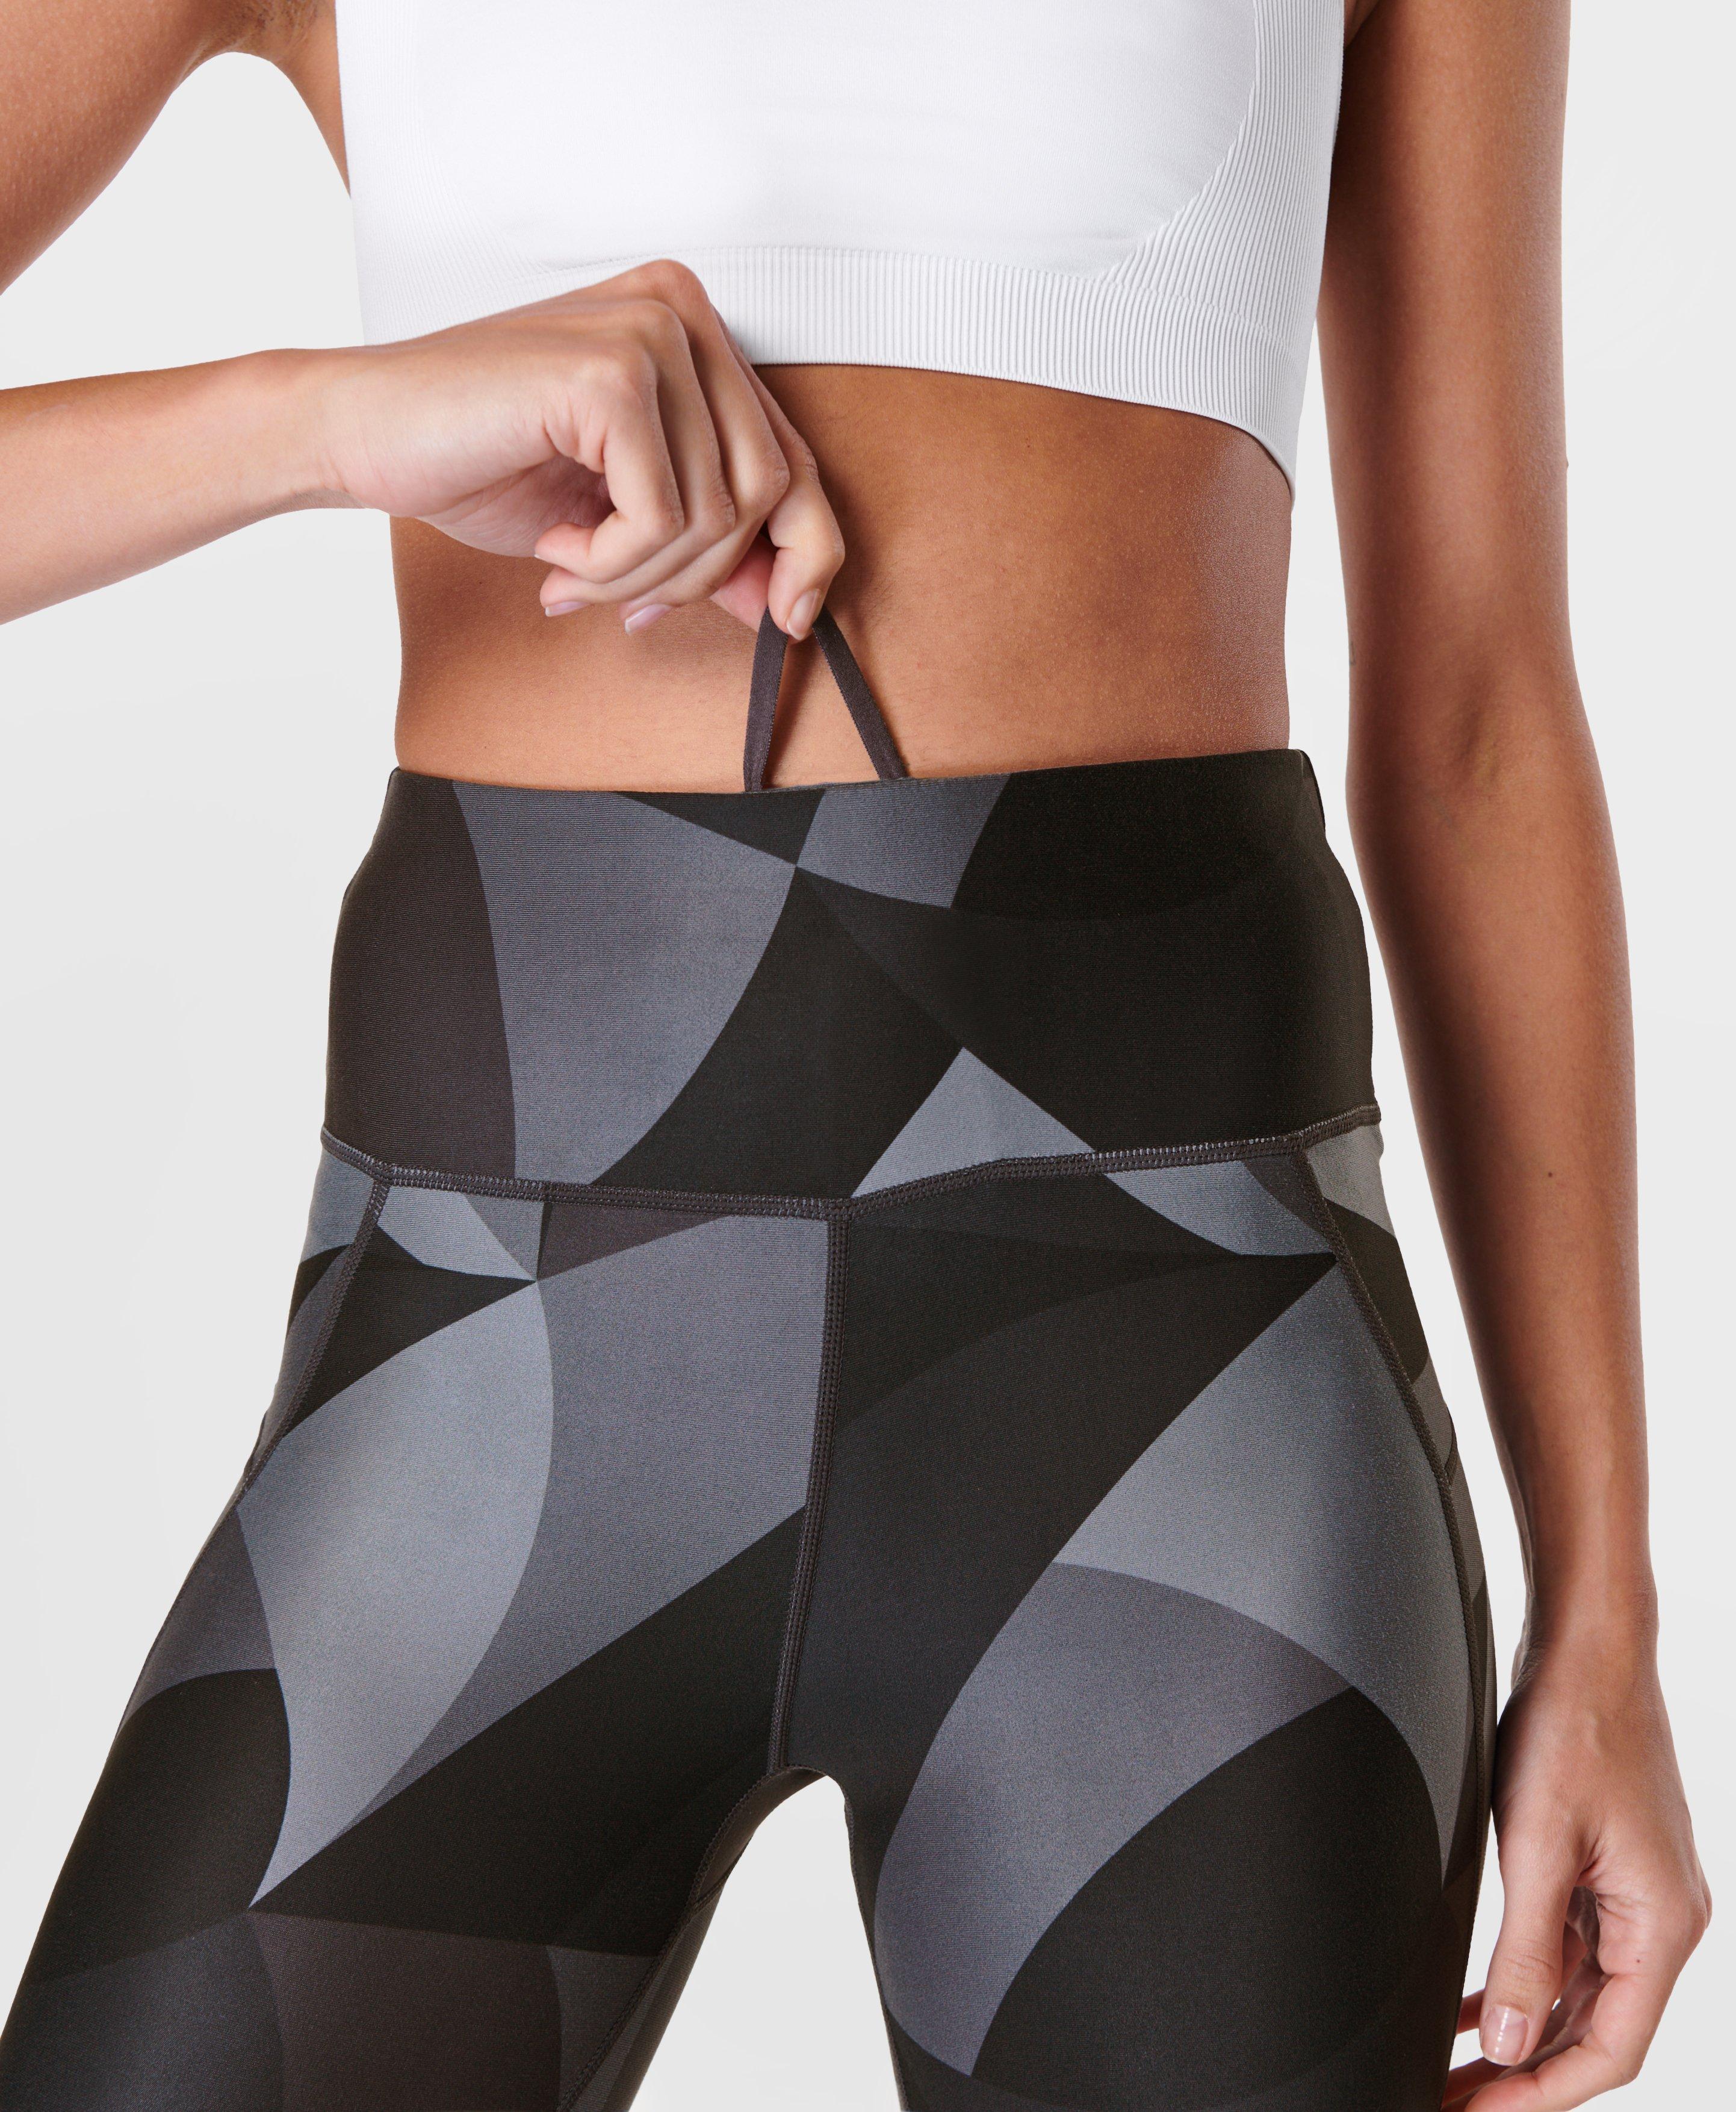 All Day Leggings - Grey Abstract Shapes Print